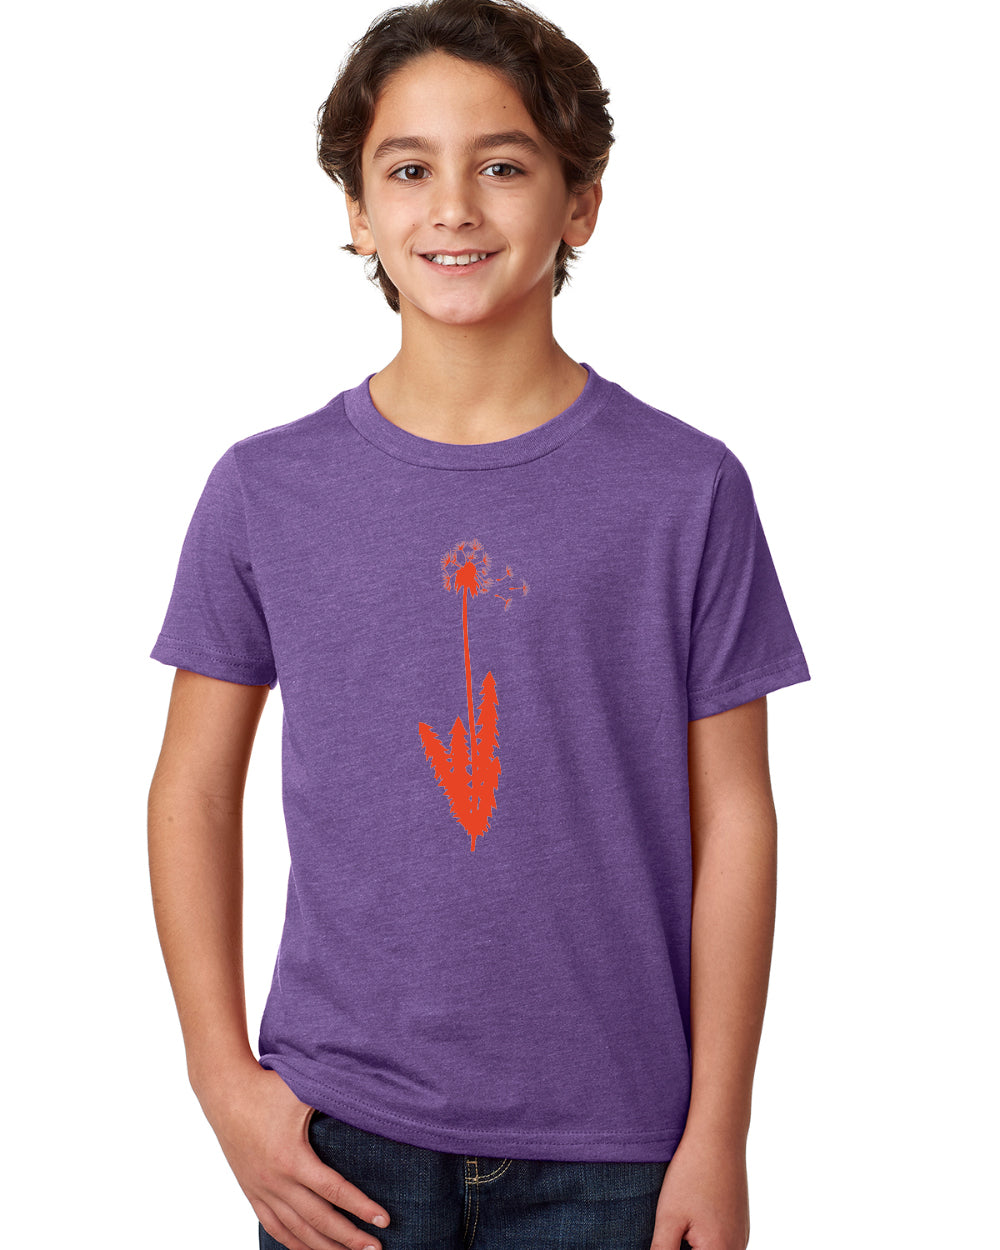 3 Wishes T-Shirt - Toddler & Youth Purple